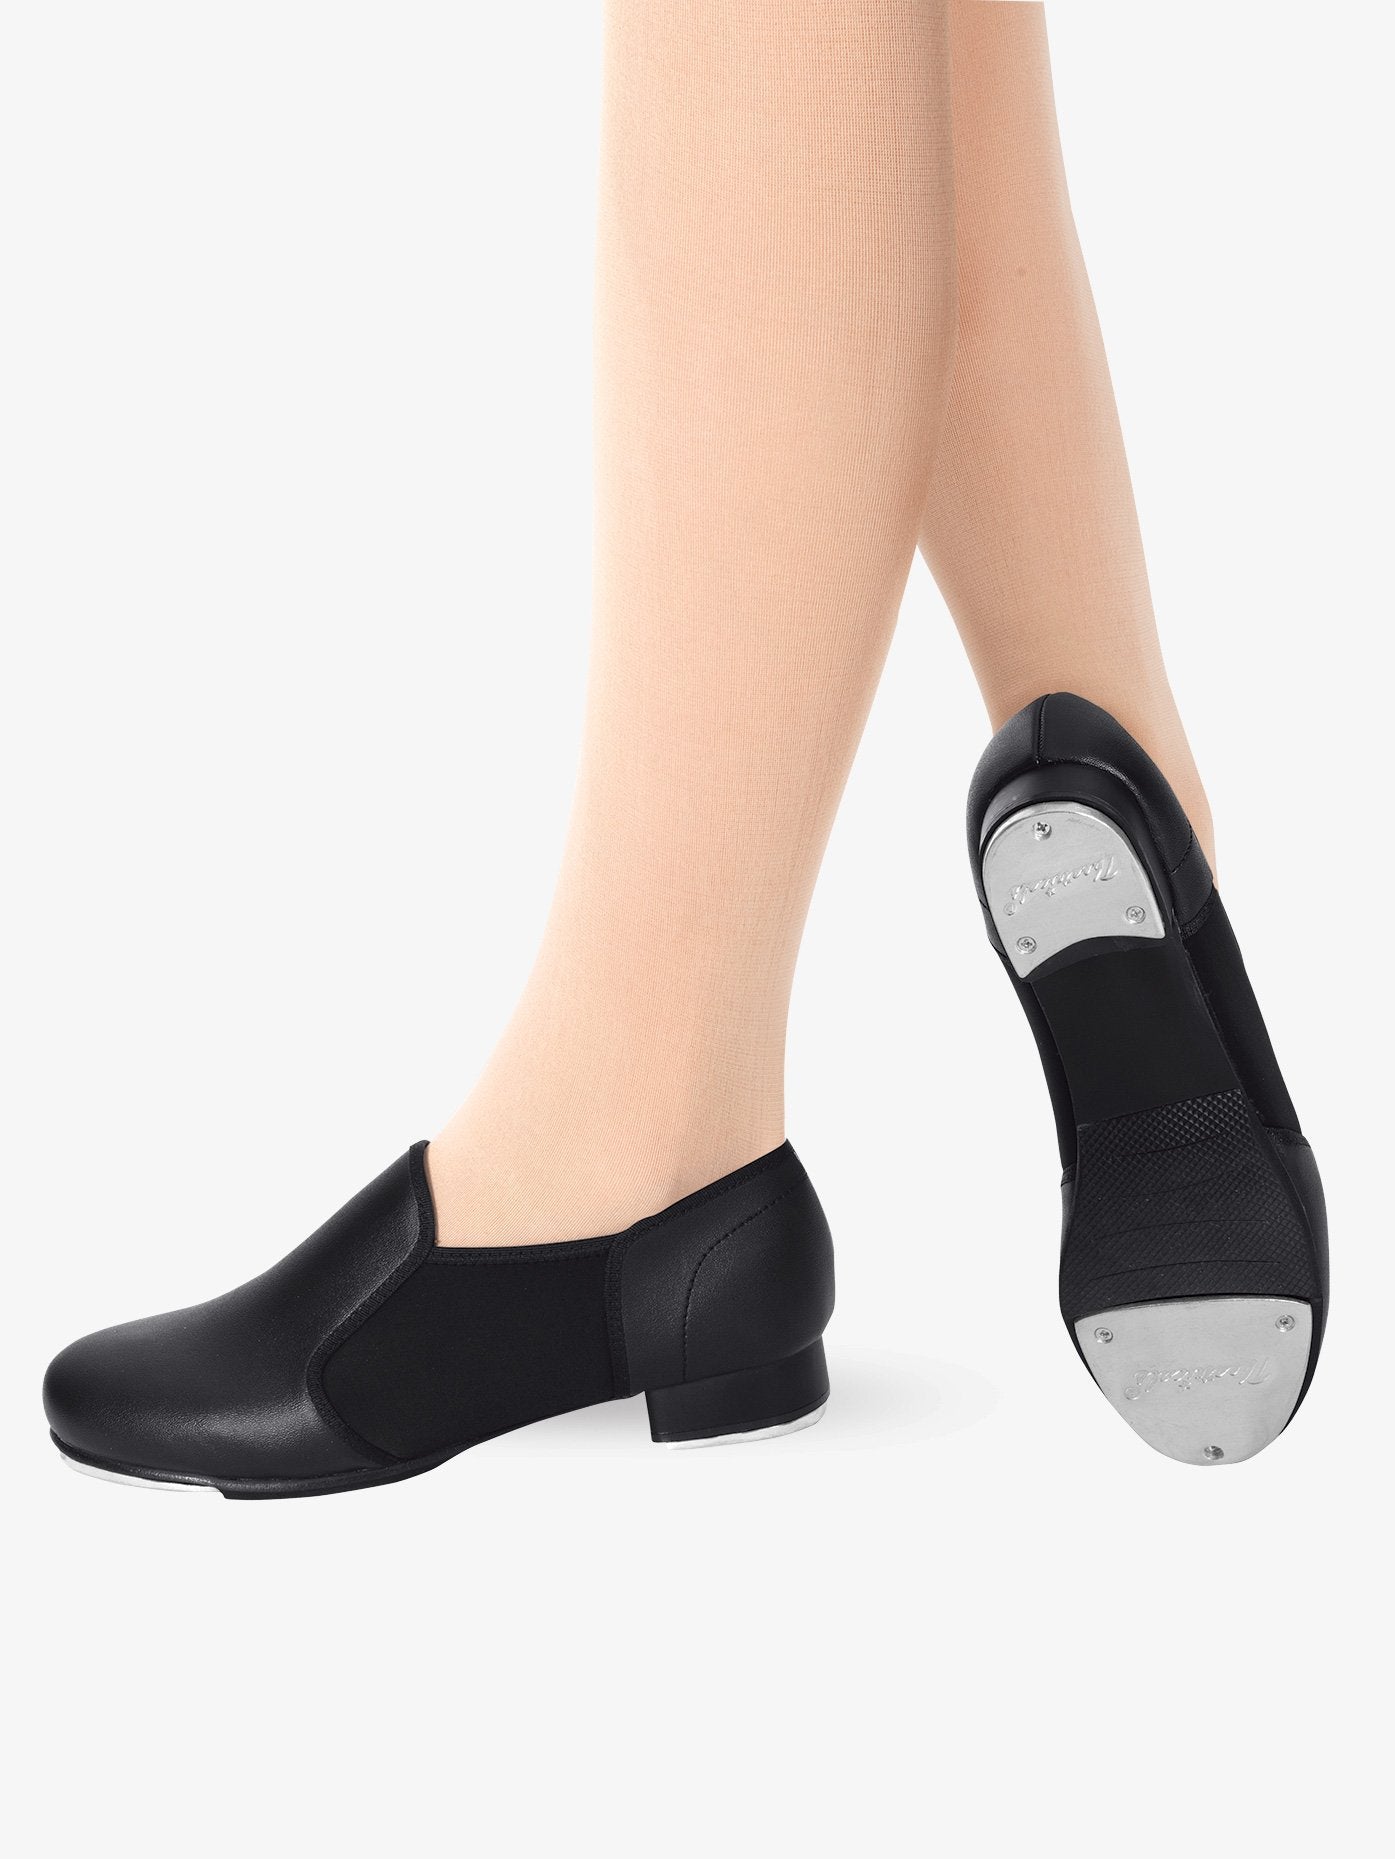 Theatricals Child Slip-on Black Tap Shoes